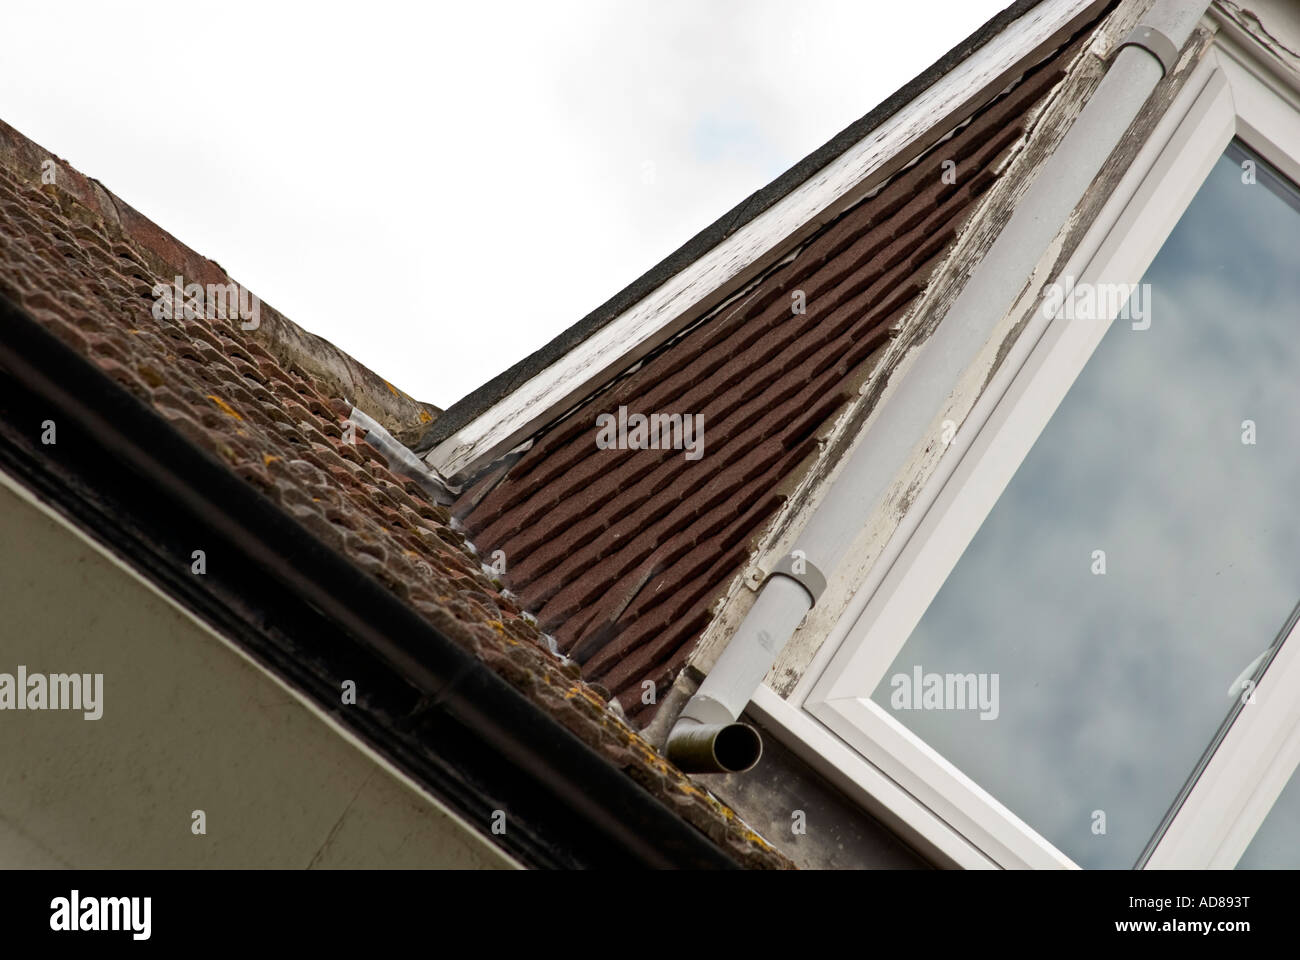 BADLY REPAIRED ROOF Stock Photo